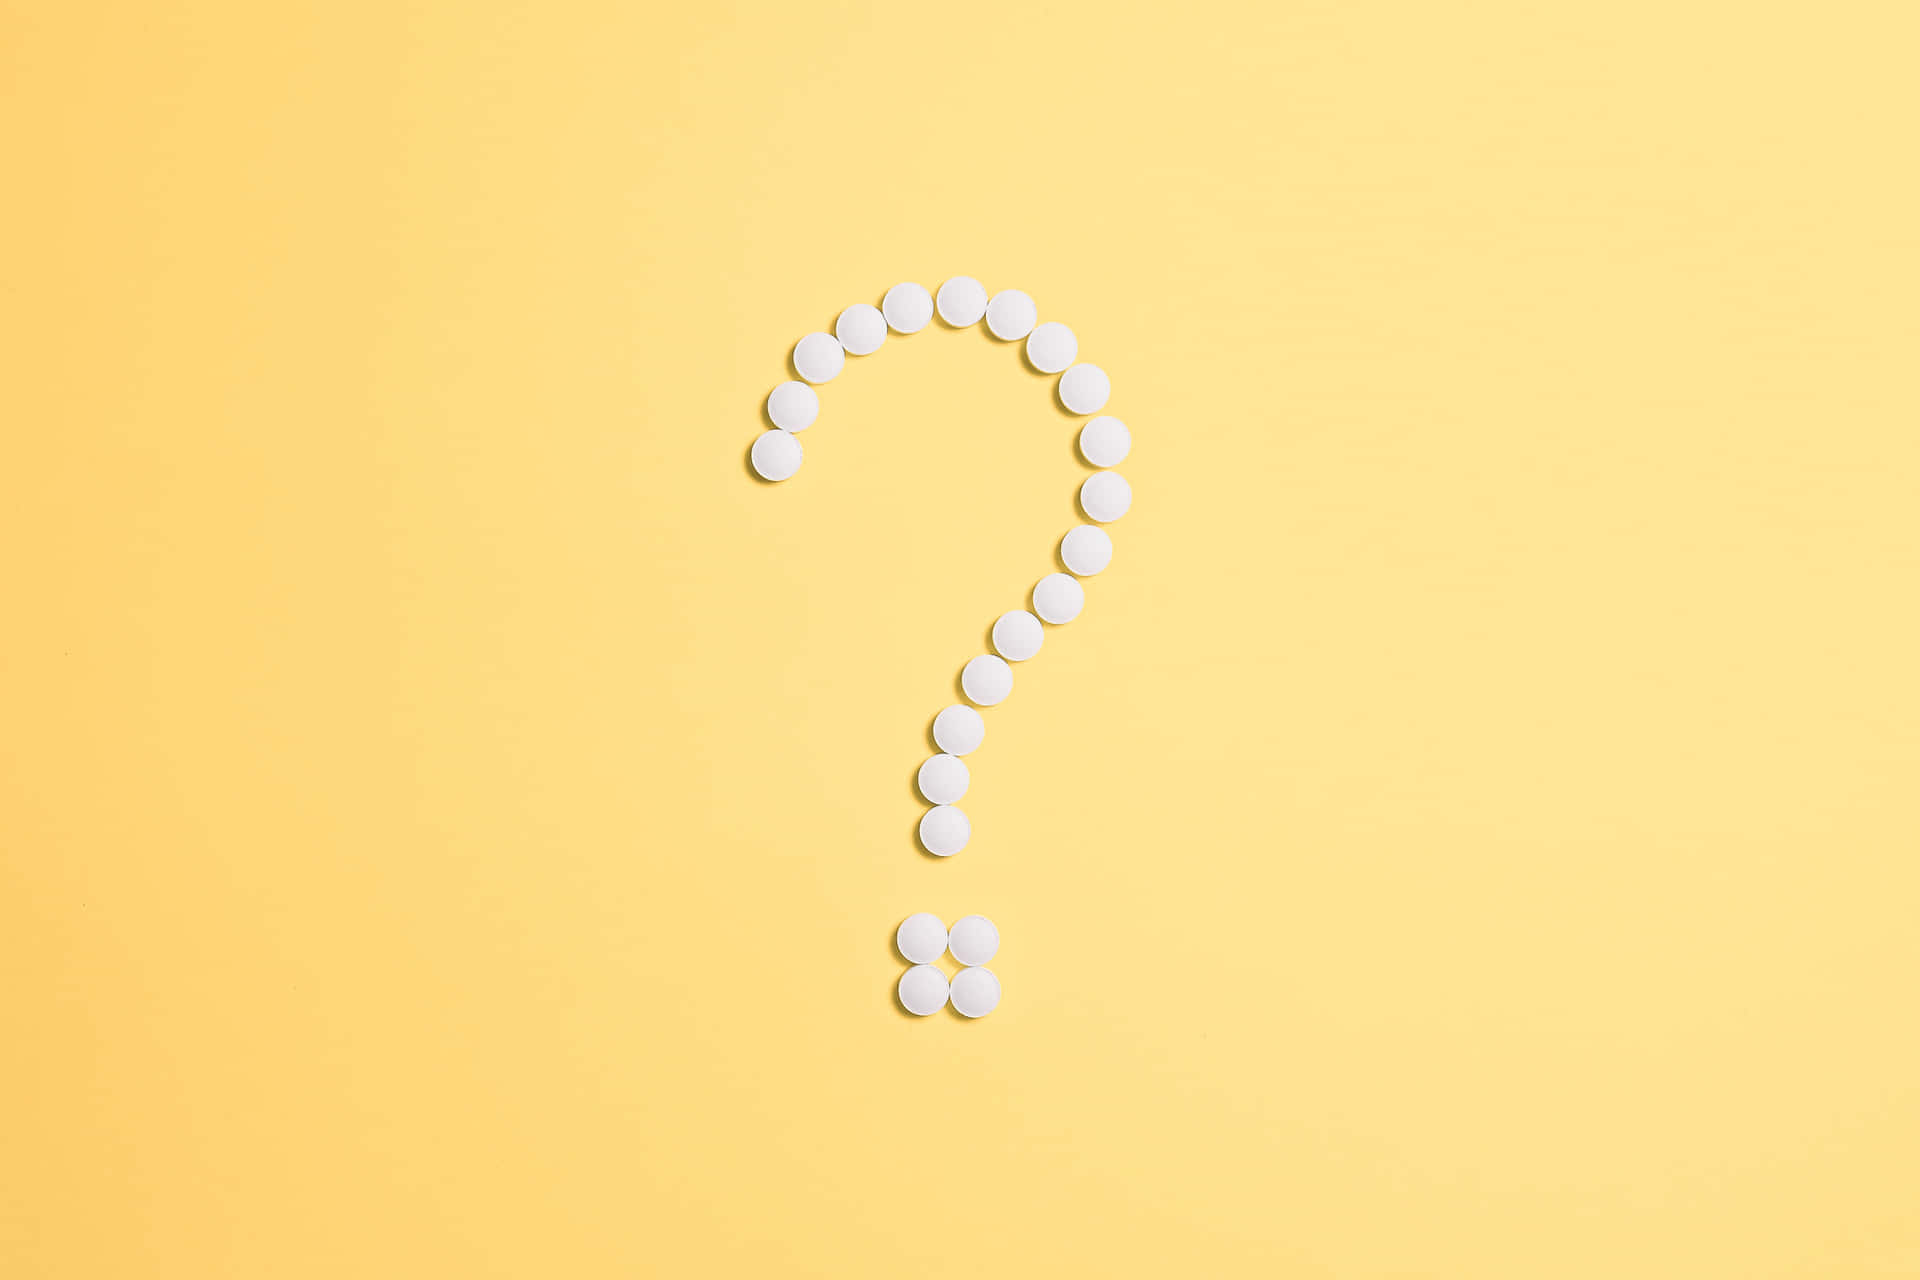 A Question Mark Made Of Pills On A Yellow Background